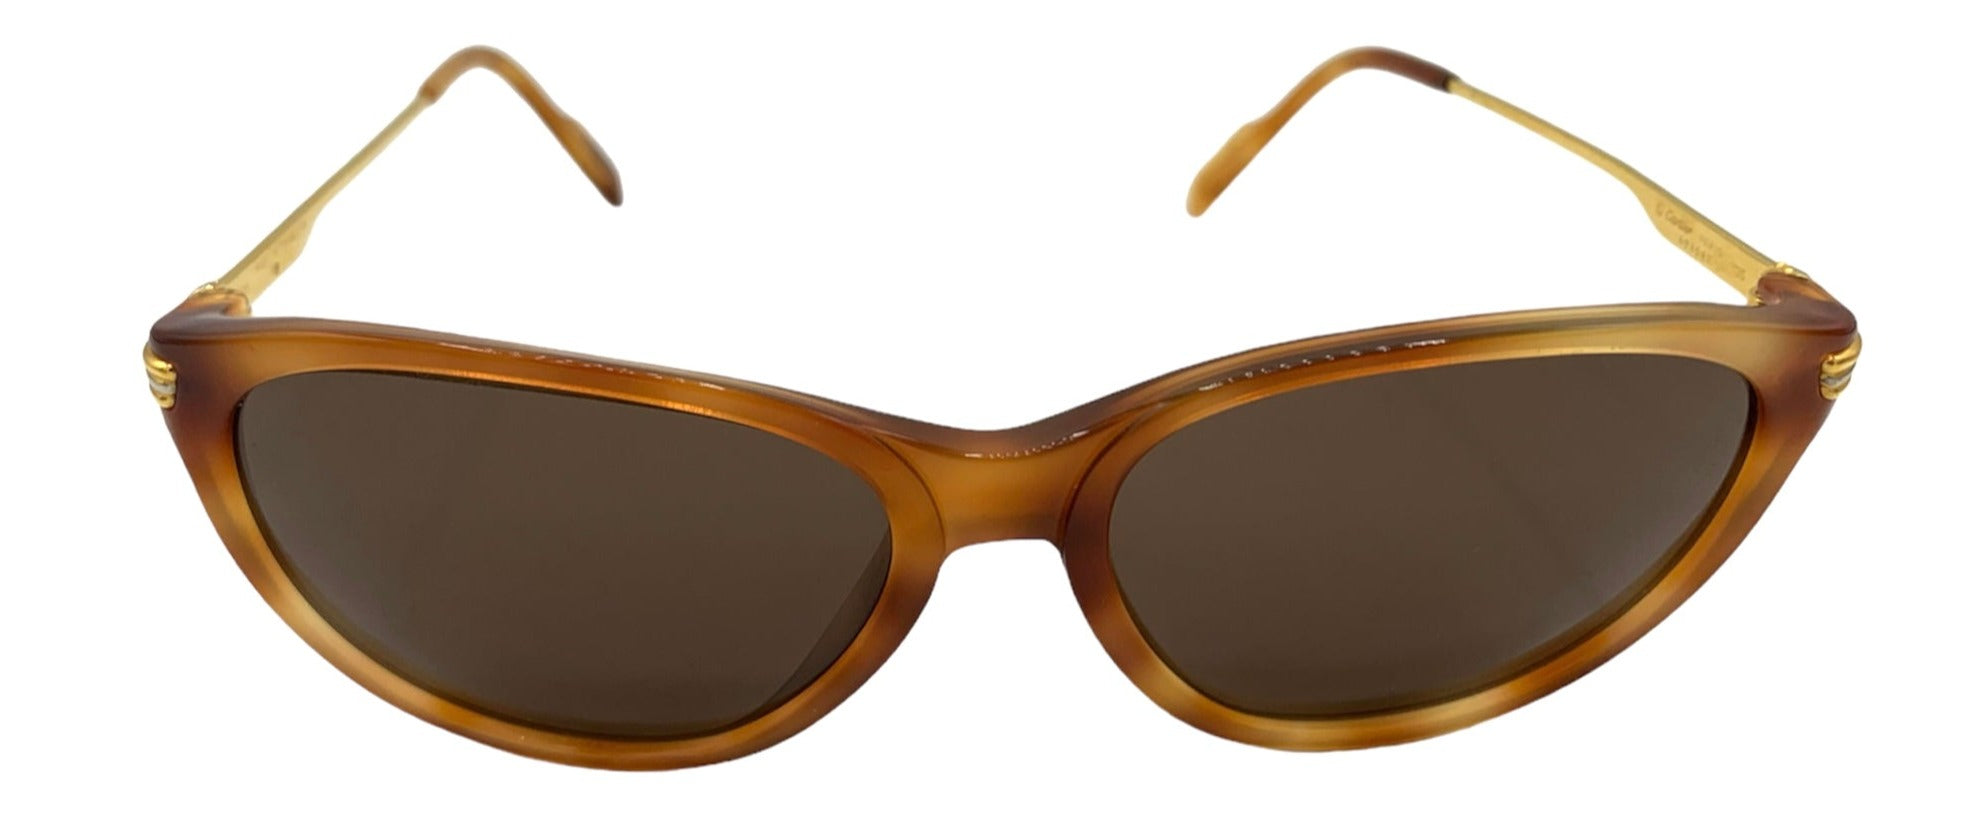 Cartier 90s Gold Plated Tortoiseshell Sunglasses, front